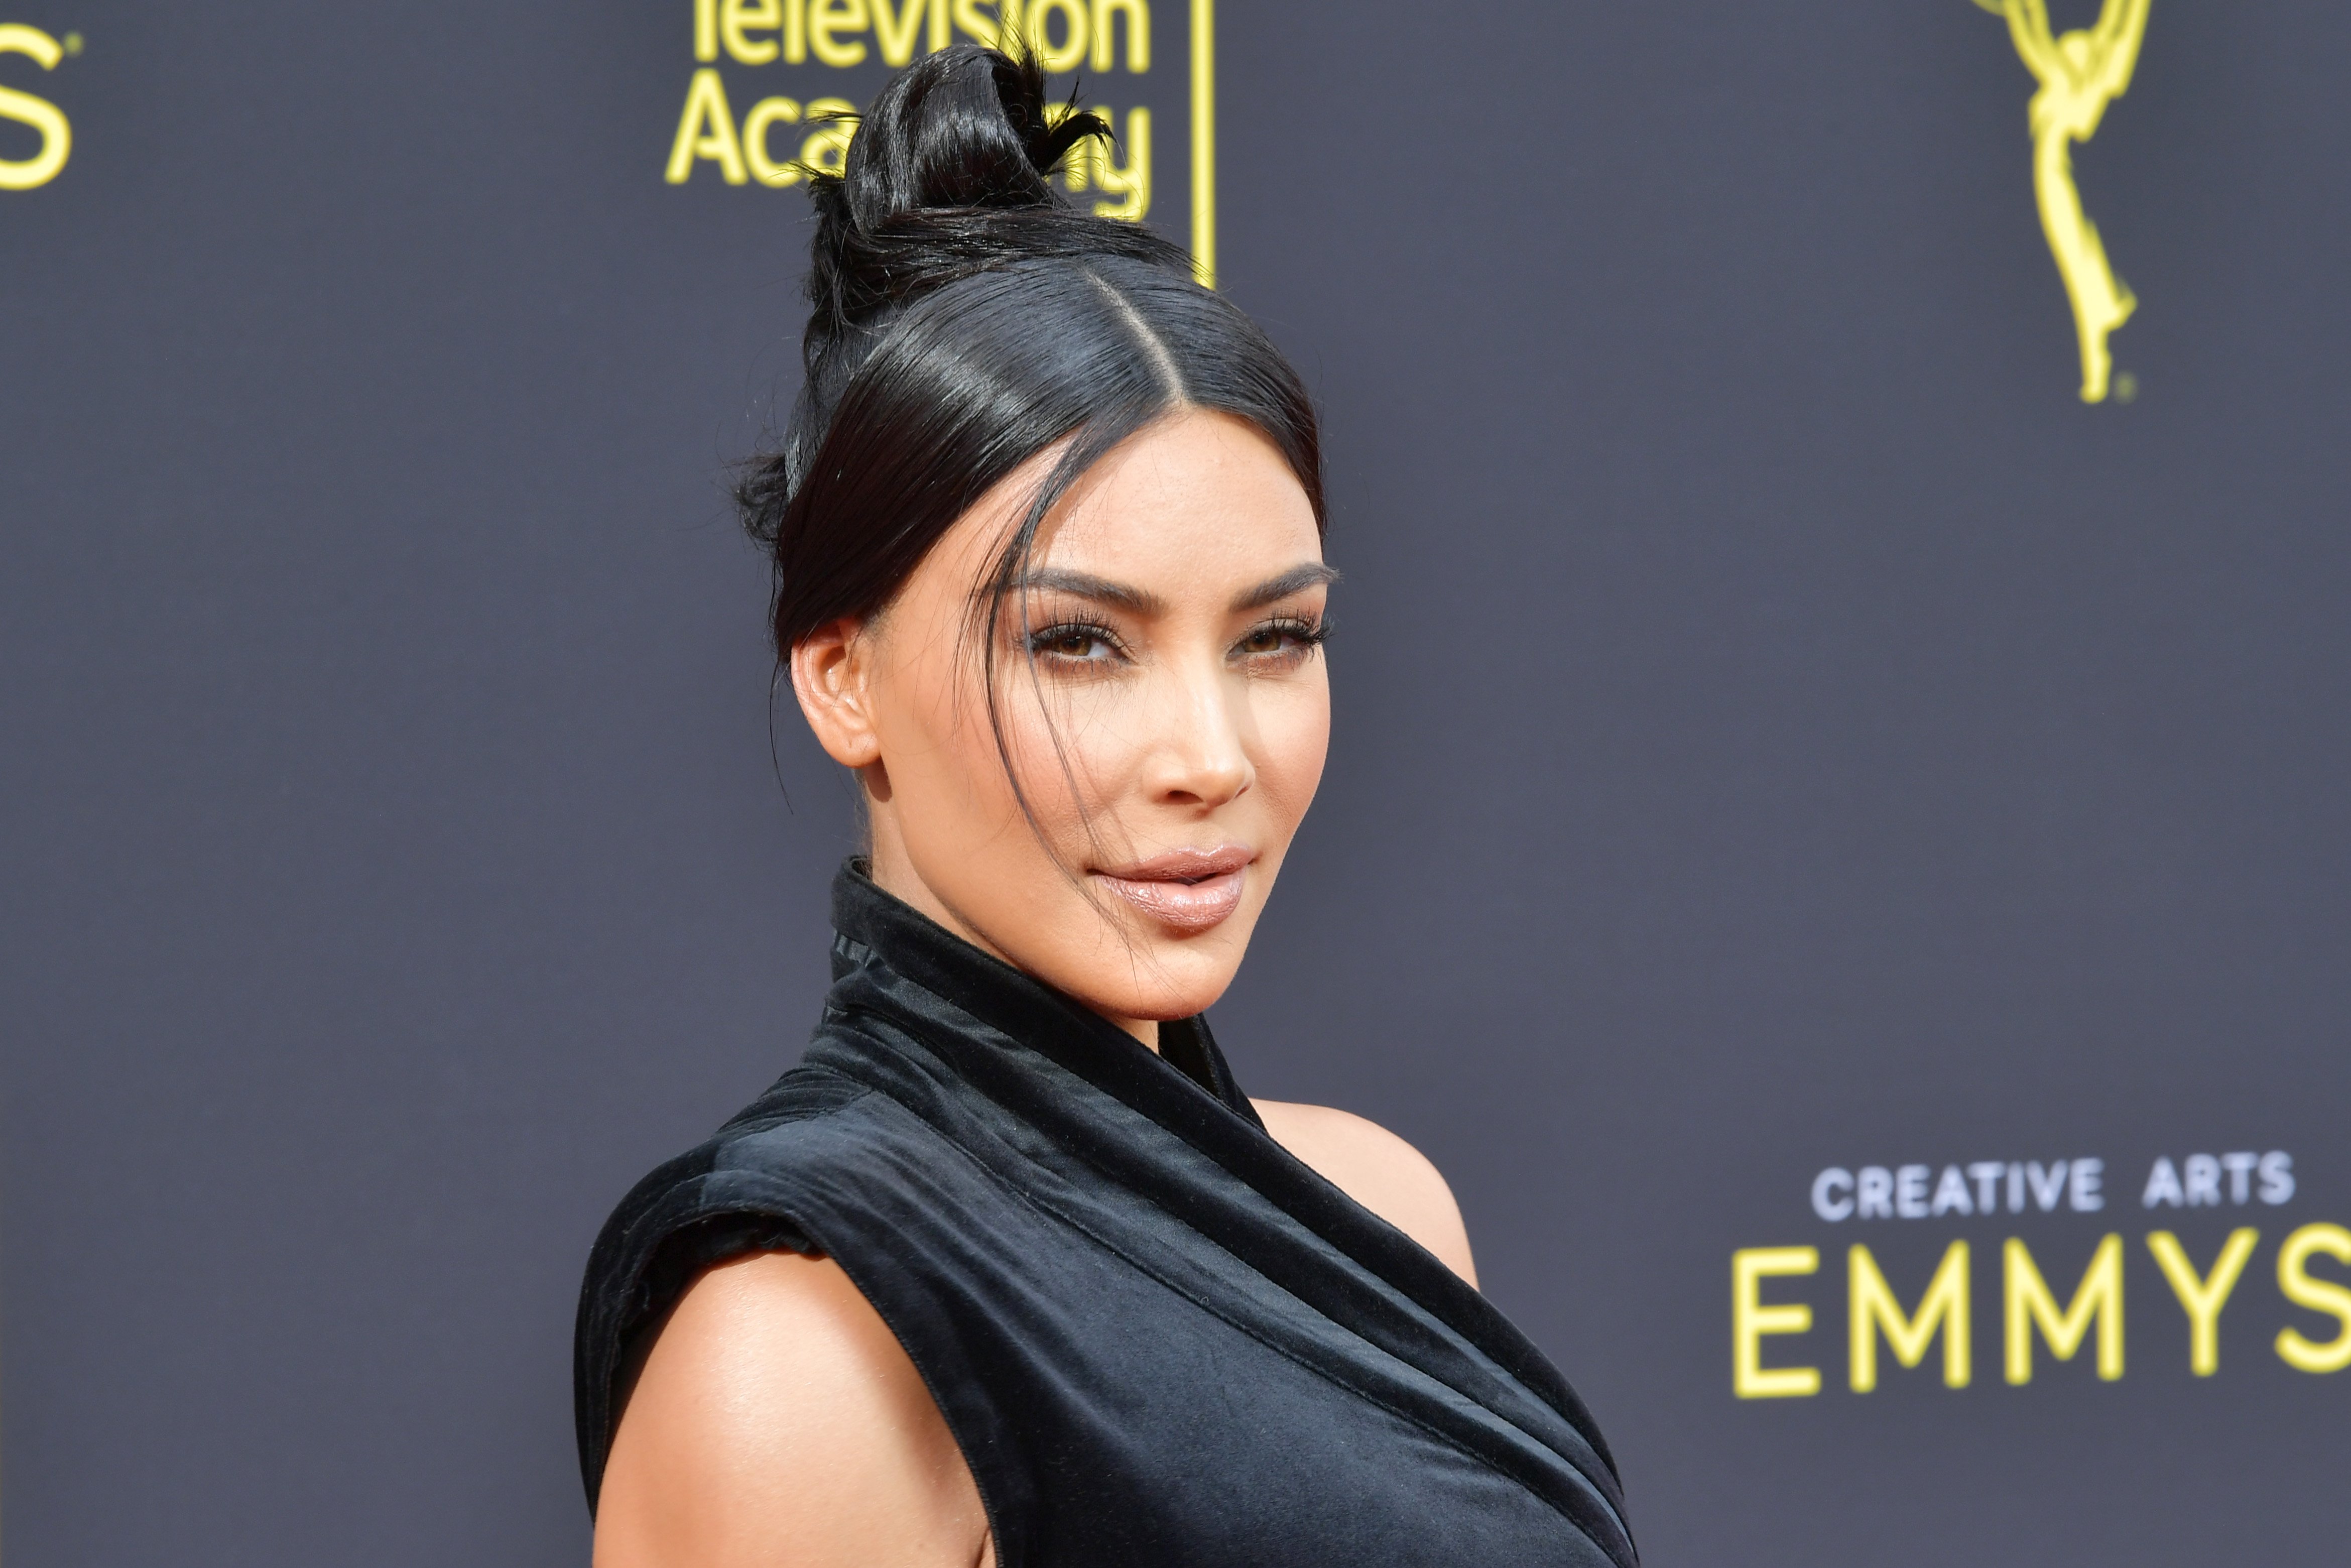 Kim Kardashian West at the 2019 Creative Arts Emmy Awards in Los Angeles on September 14, 2019. | Photo: Getty Images